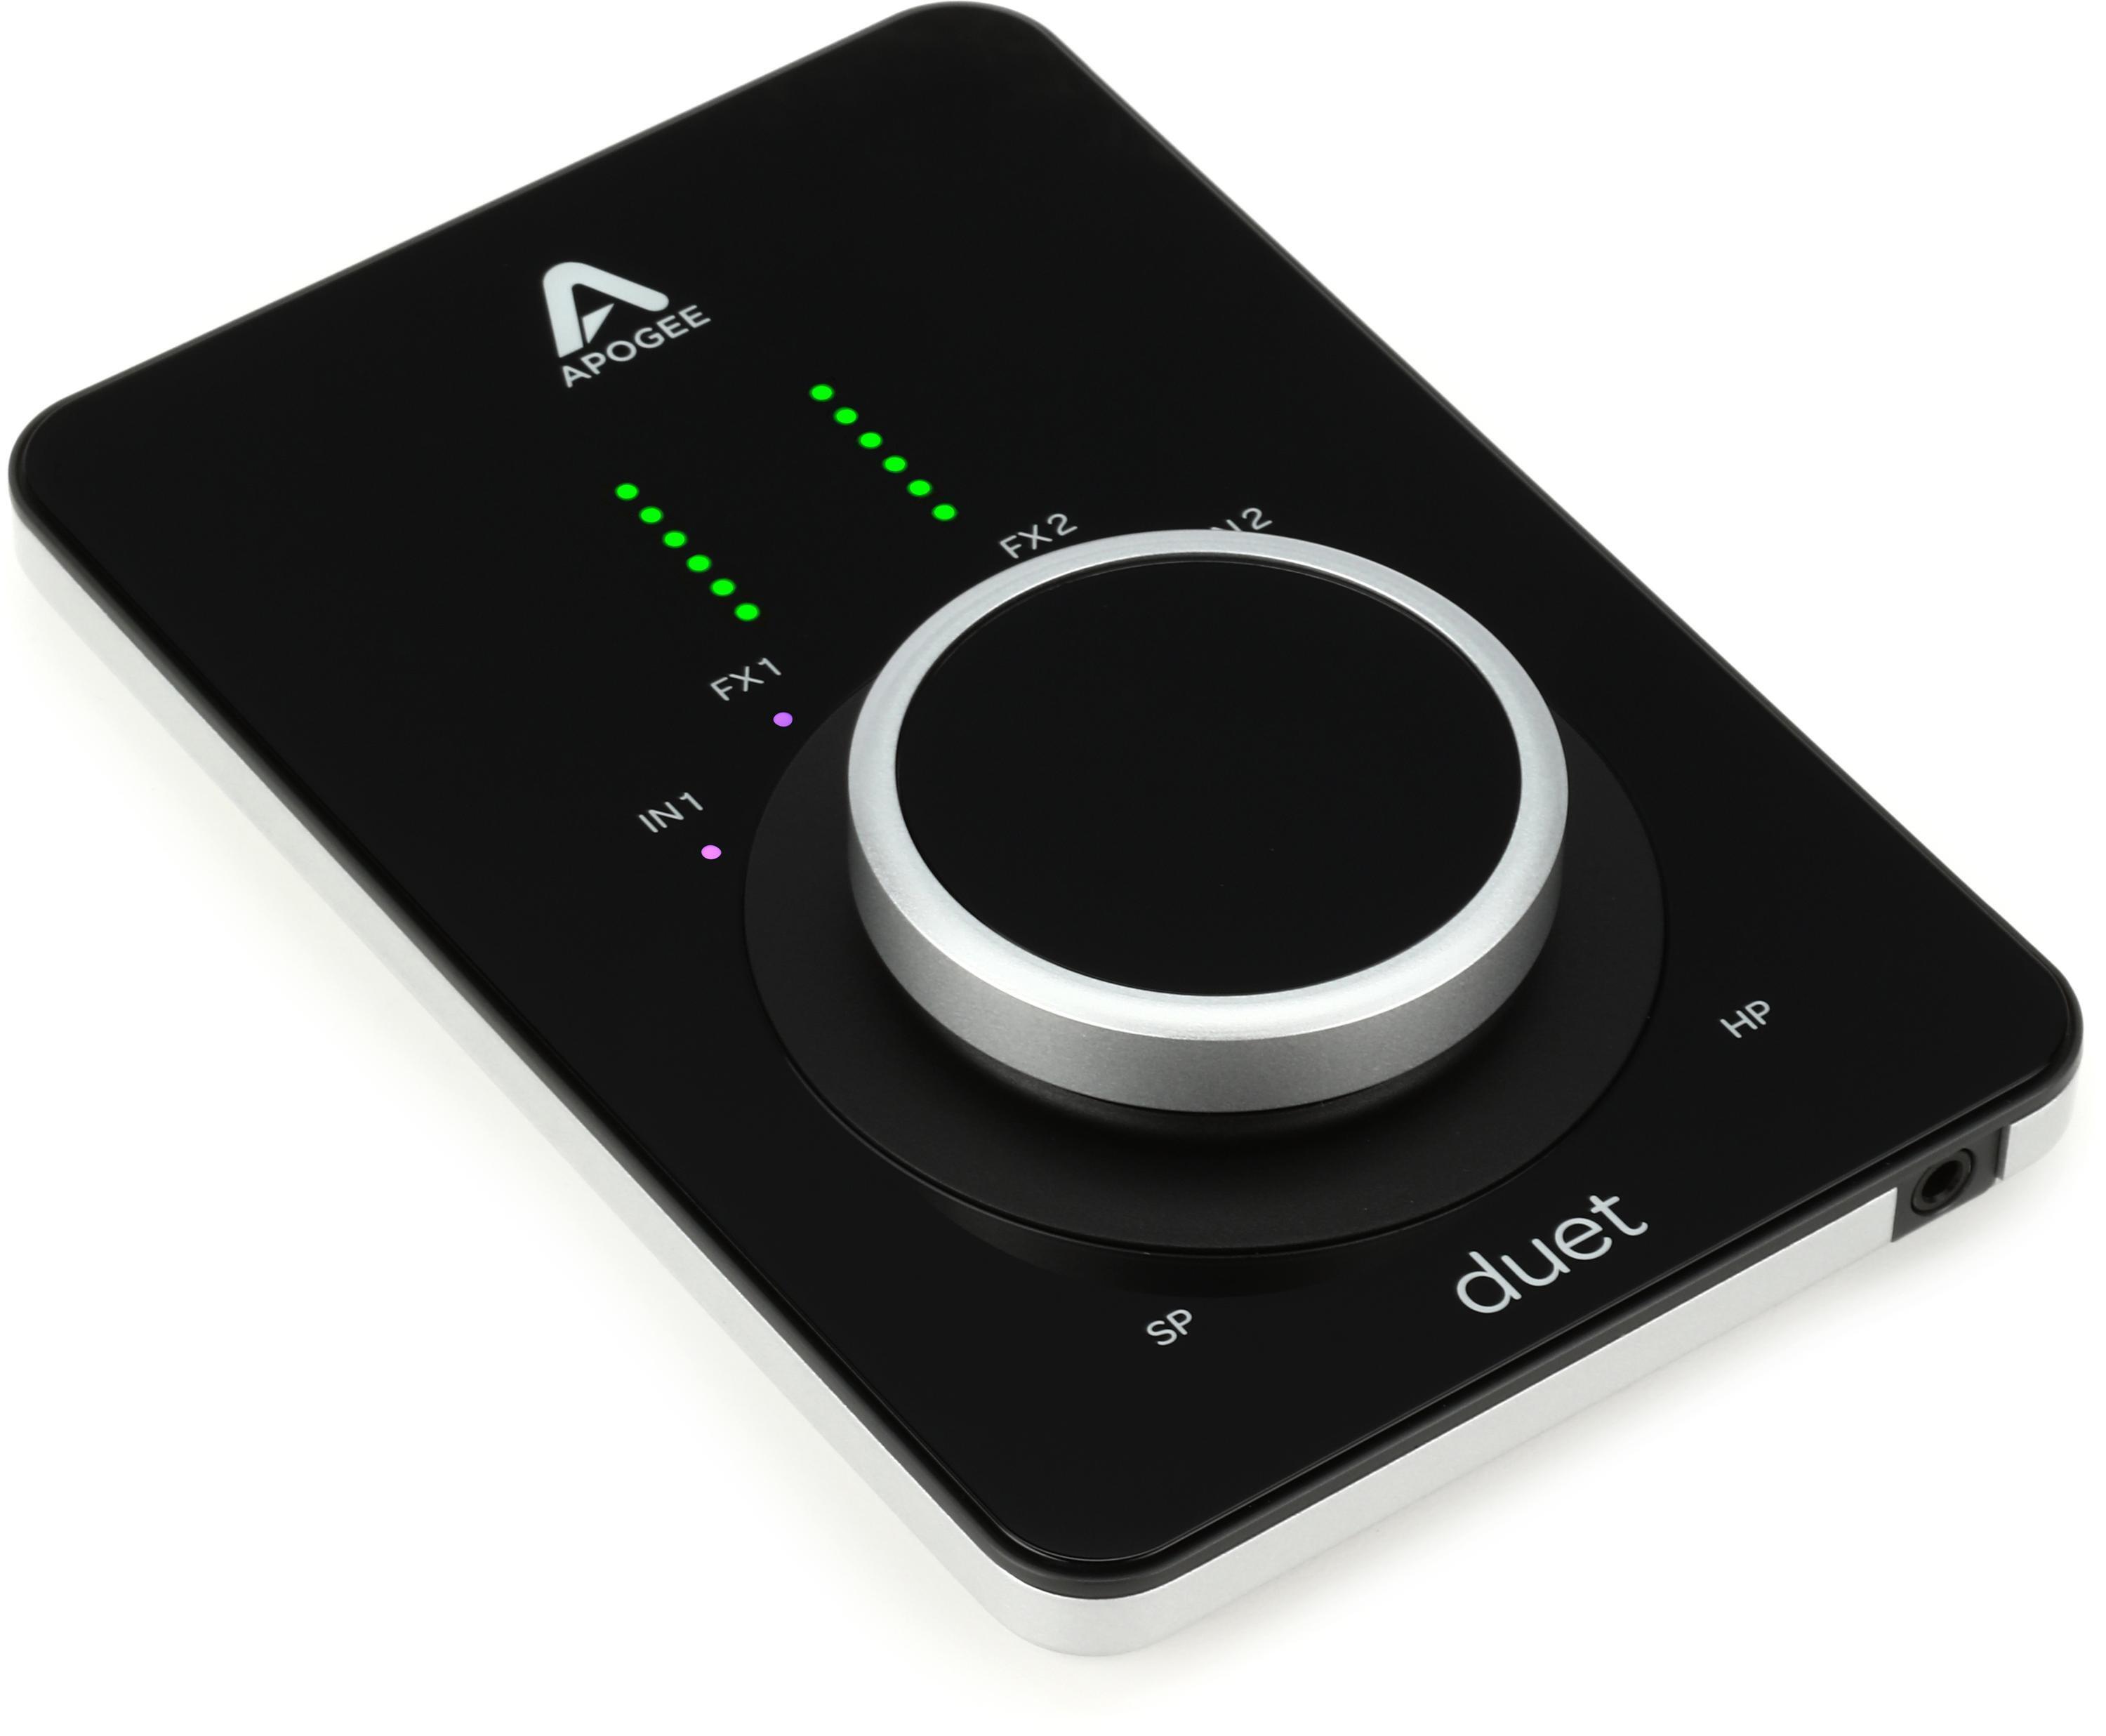 Apogee Duet 3 and Dock Bundle | Sweetwater